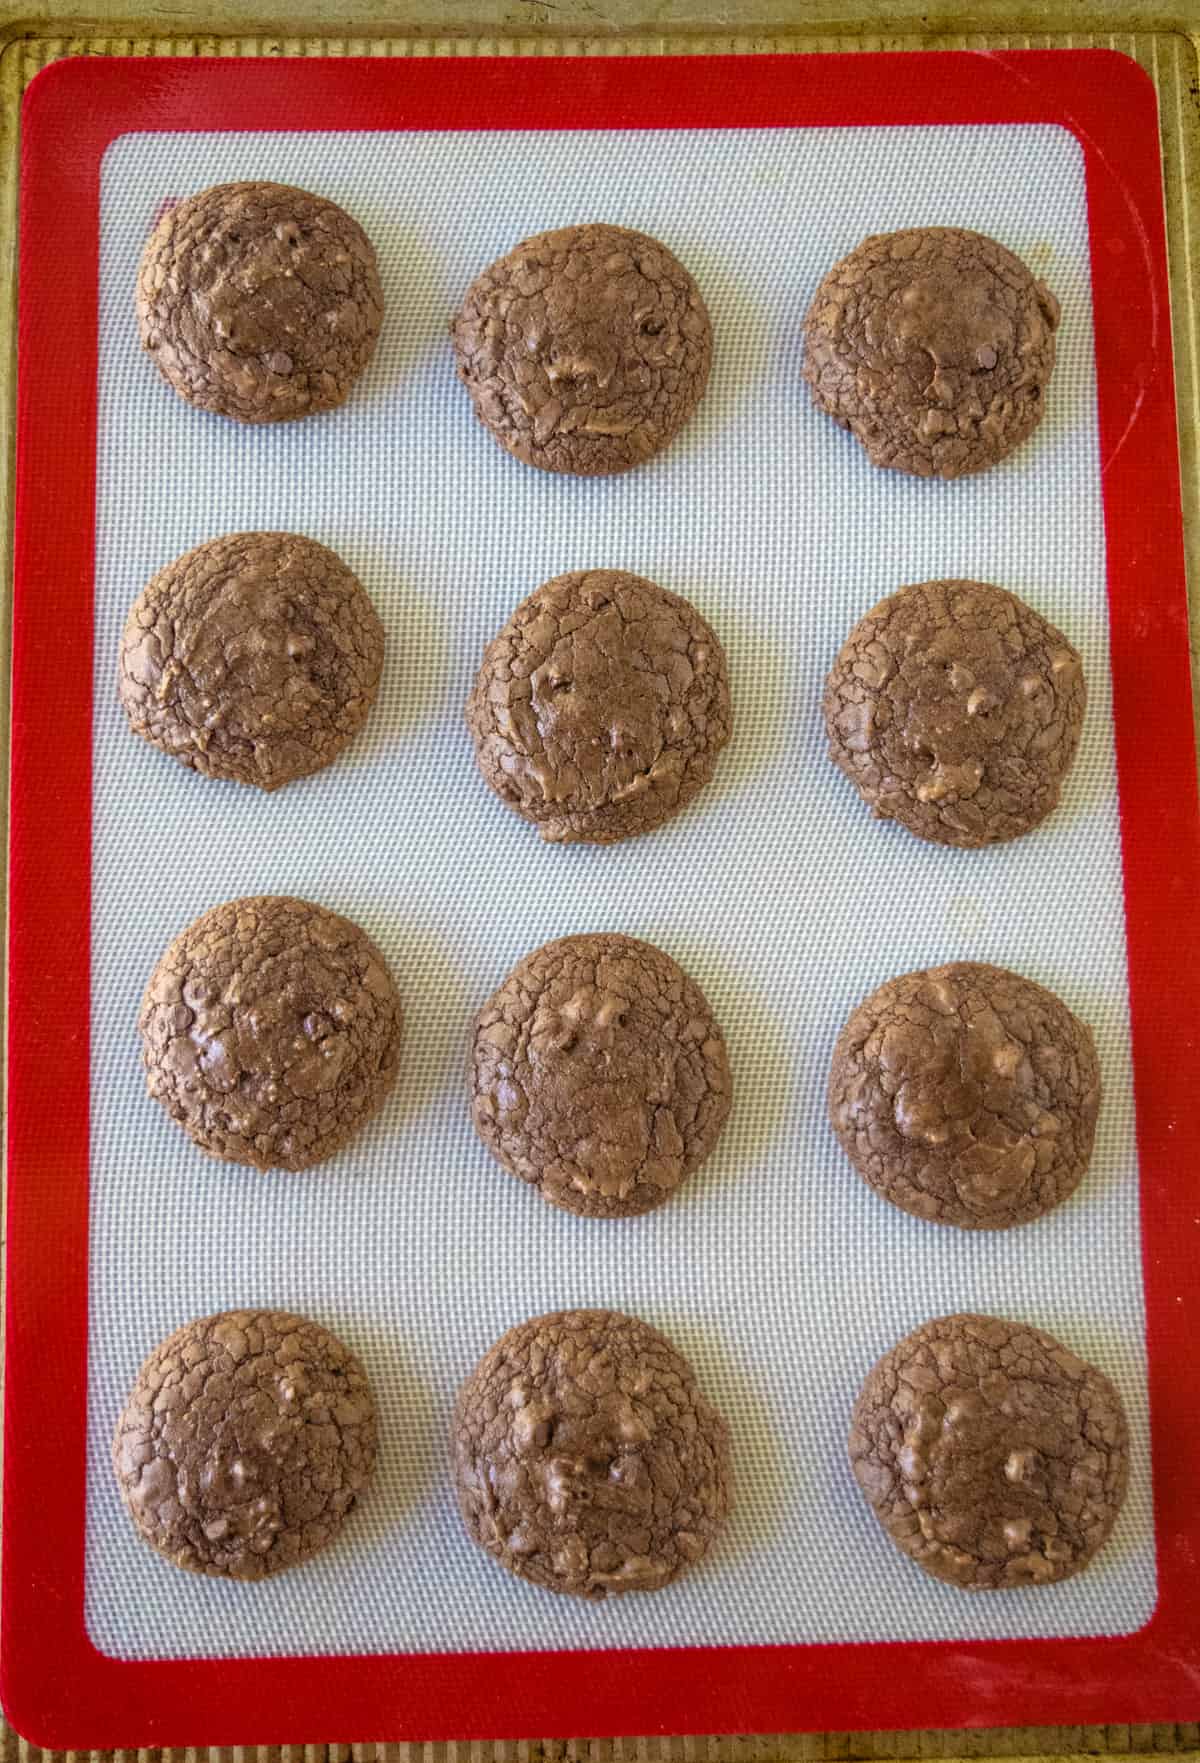 Brownie Cookies after baking on a baking sheet.